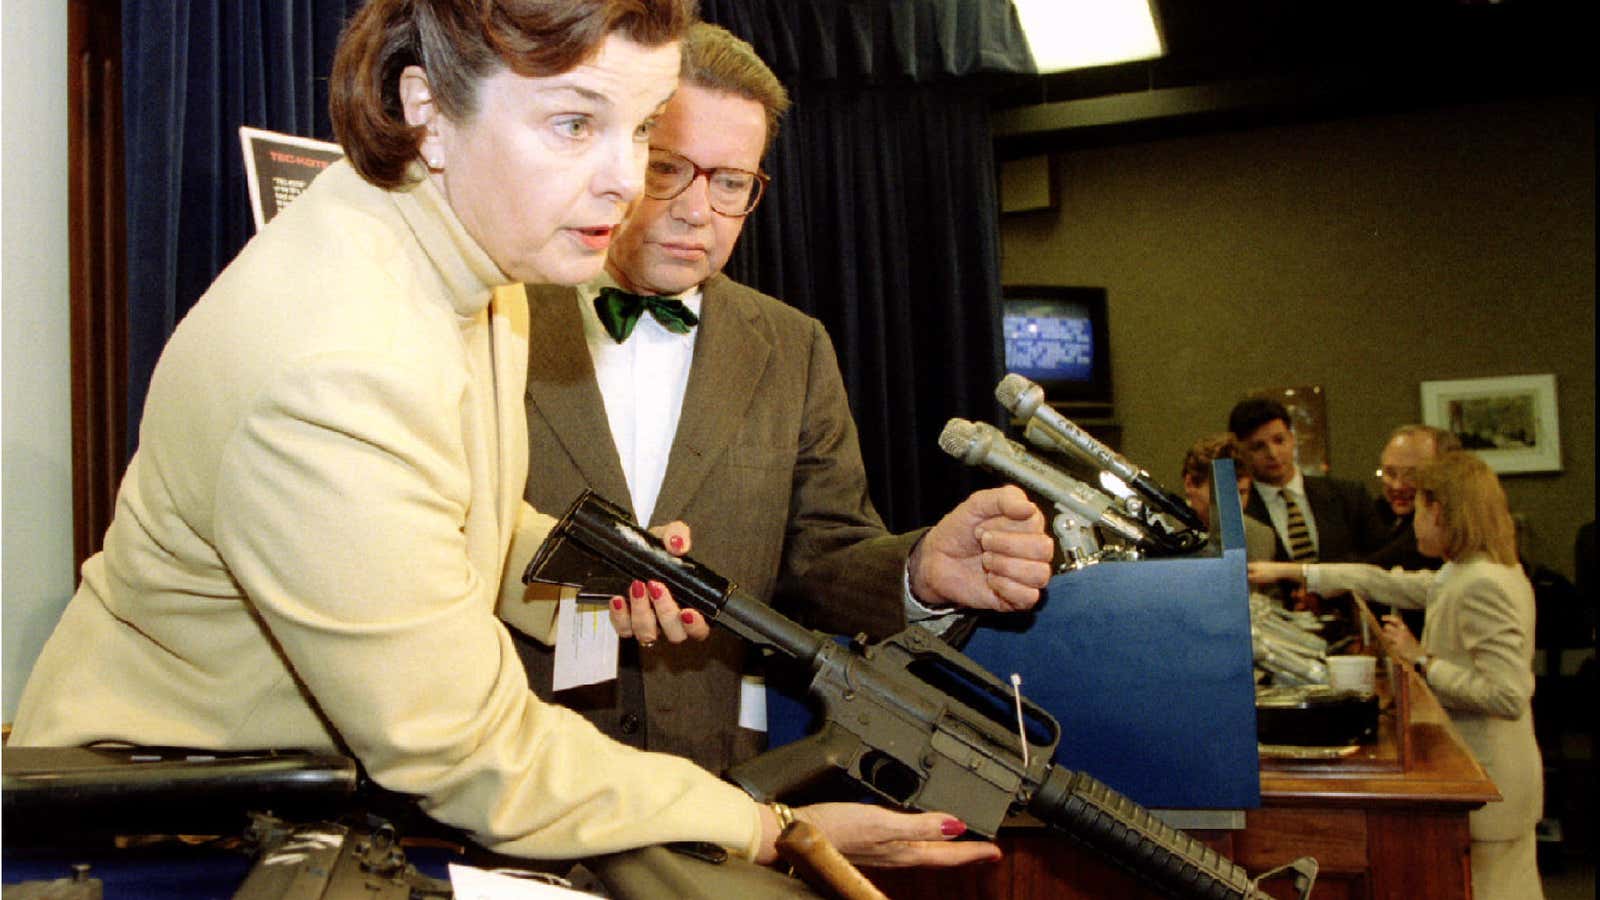 Senator Diane Feinstein displays an assault rifle at a press conference in 1994.